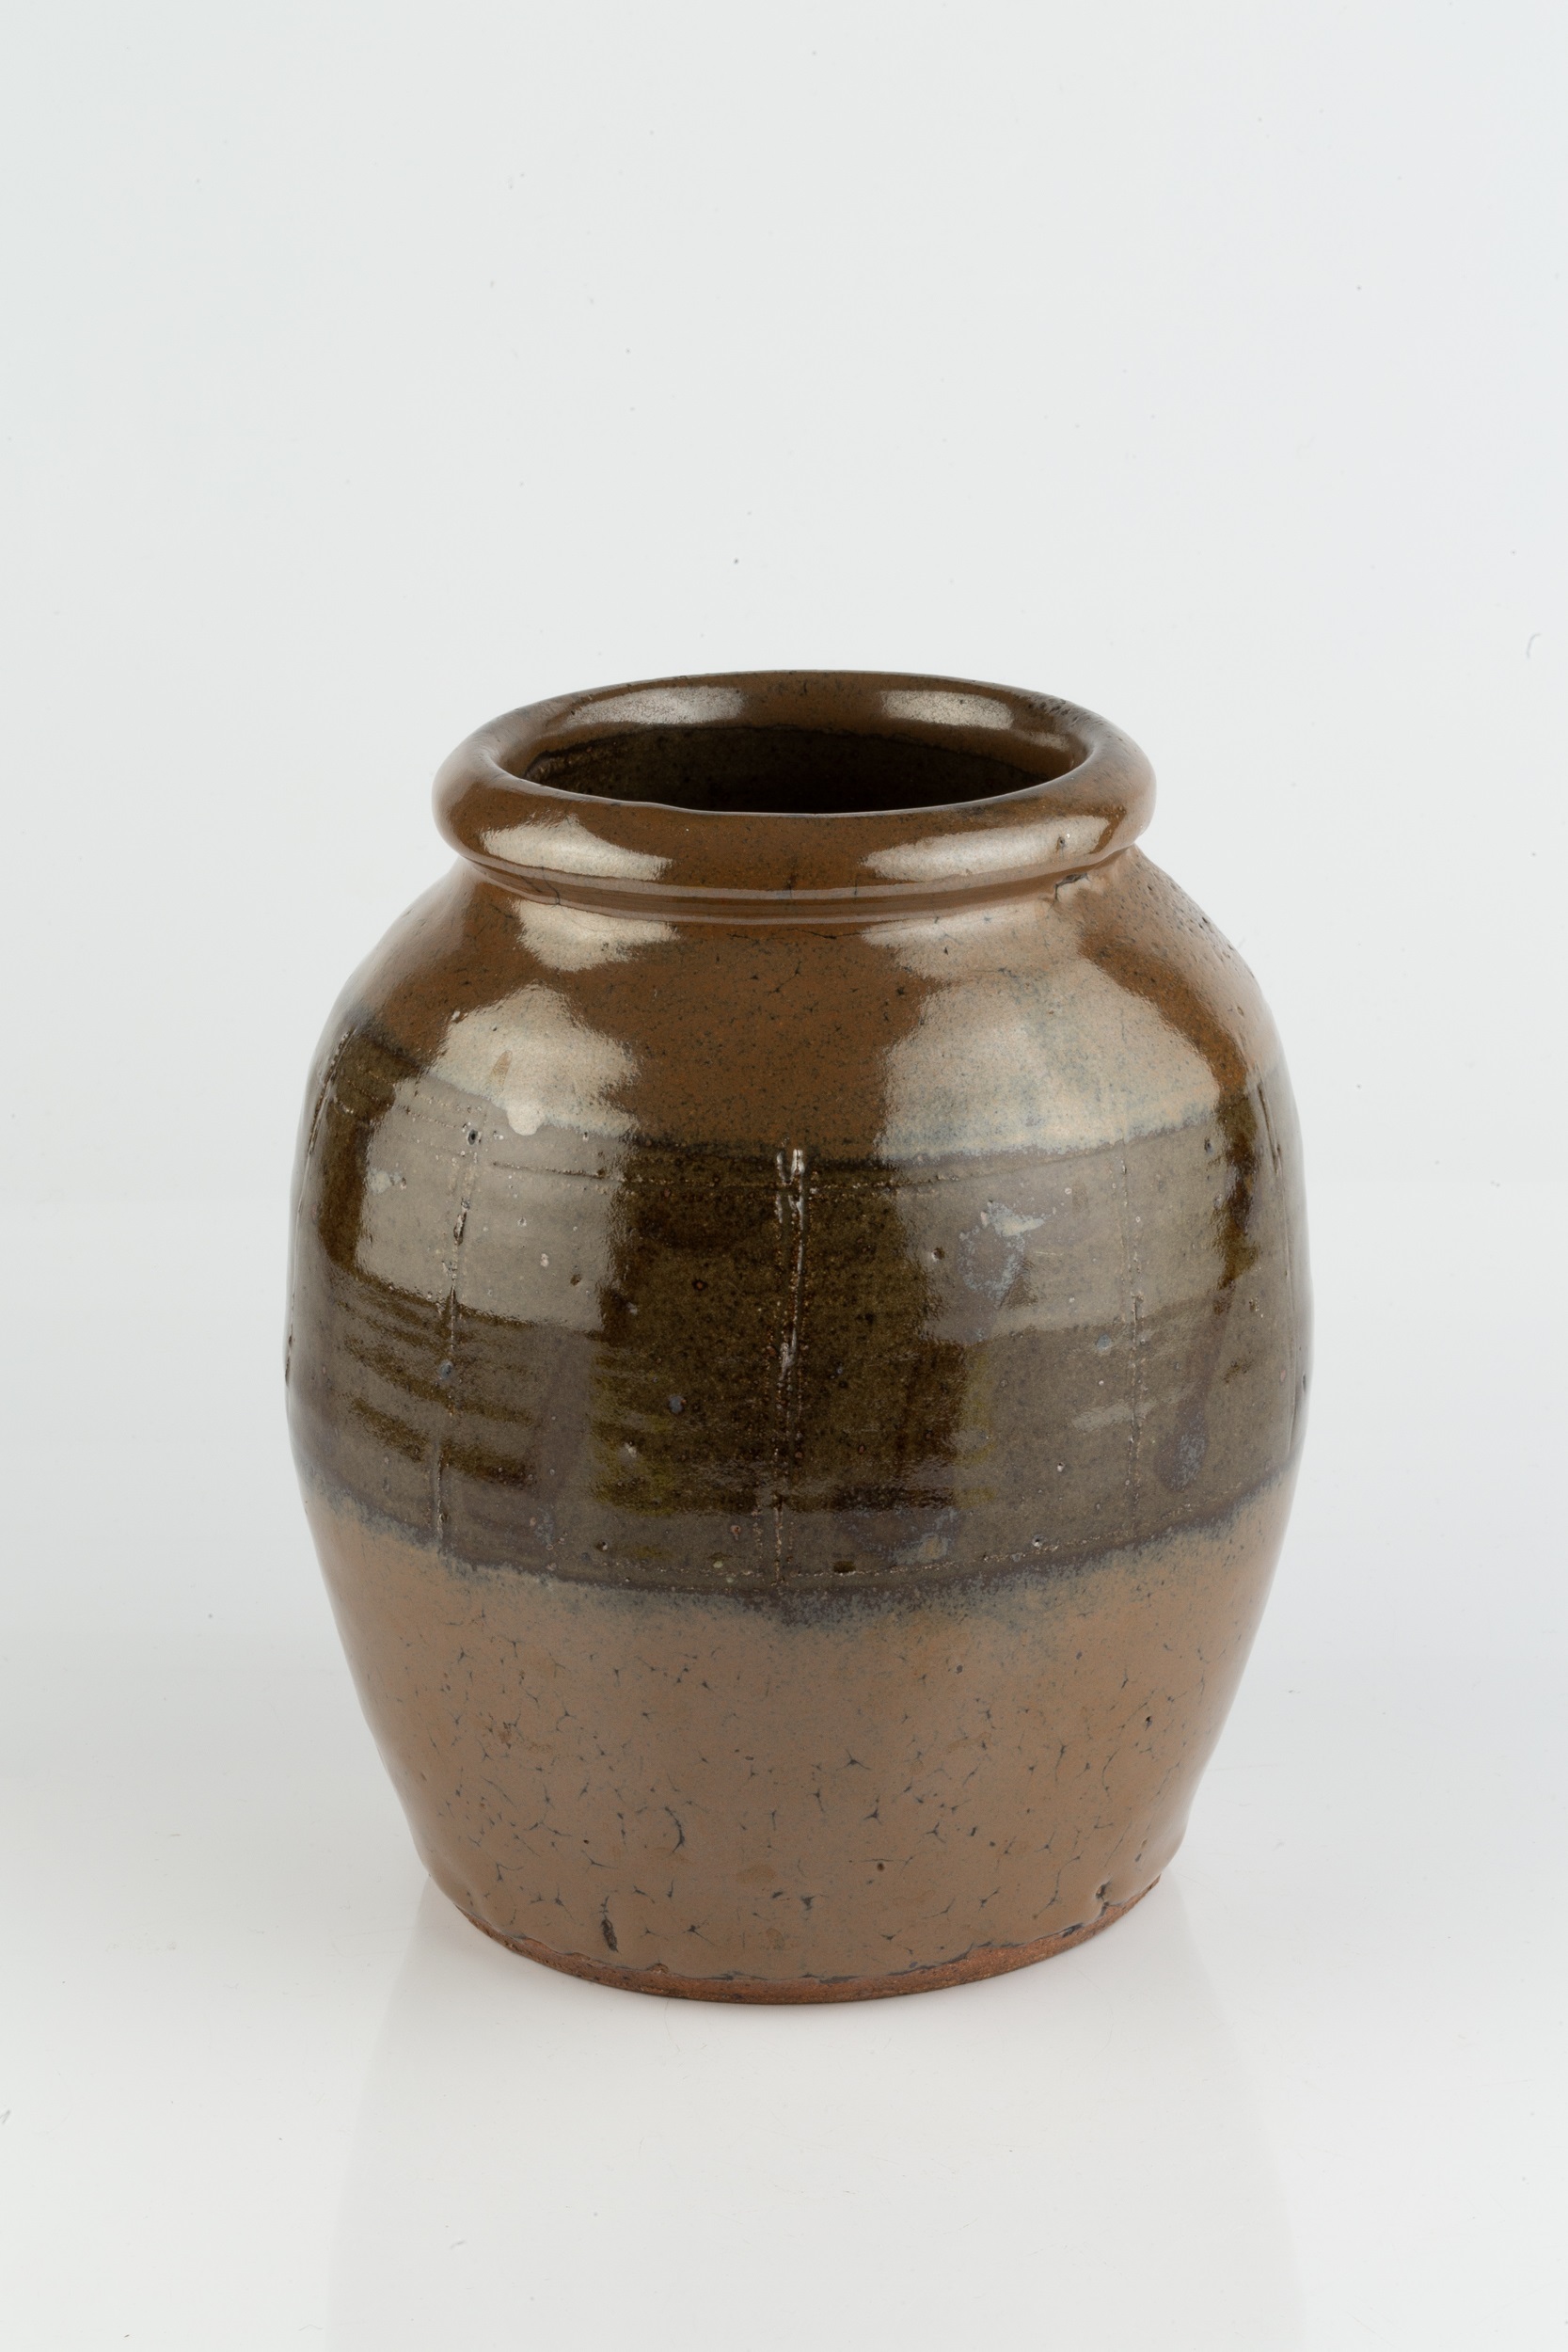 Leach Pottery Vase stoneware, the green and brown glaze with brushwork lines impressed potter's seal - Image 2 of 3